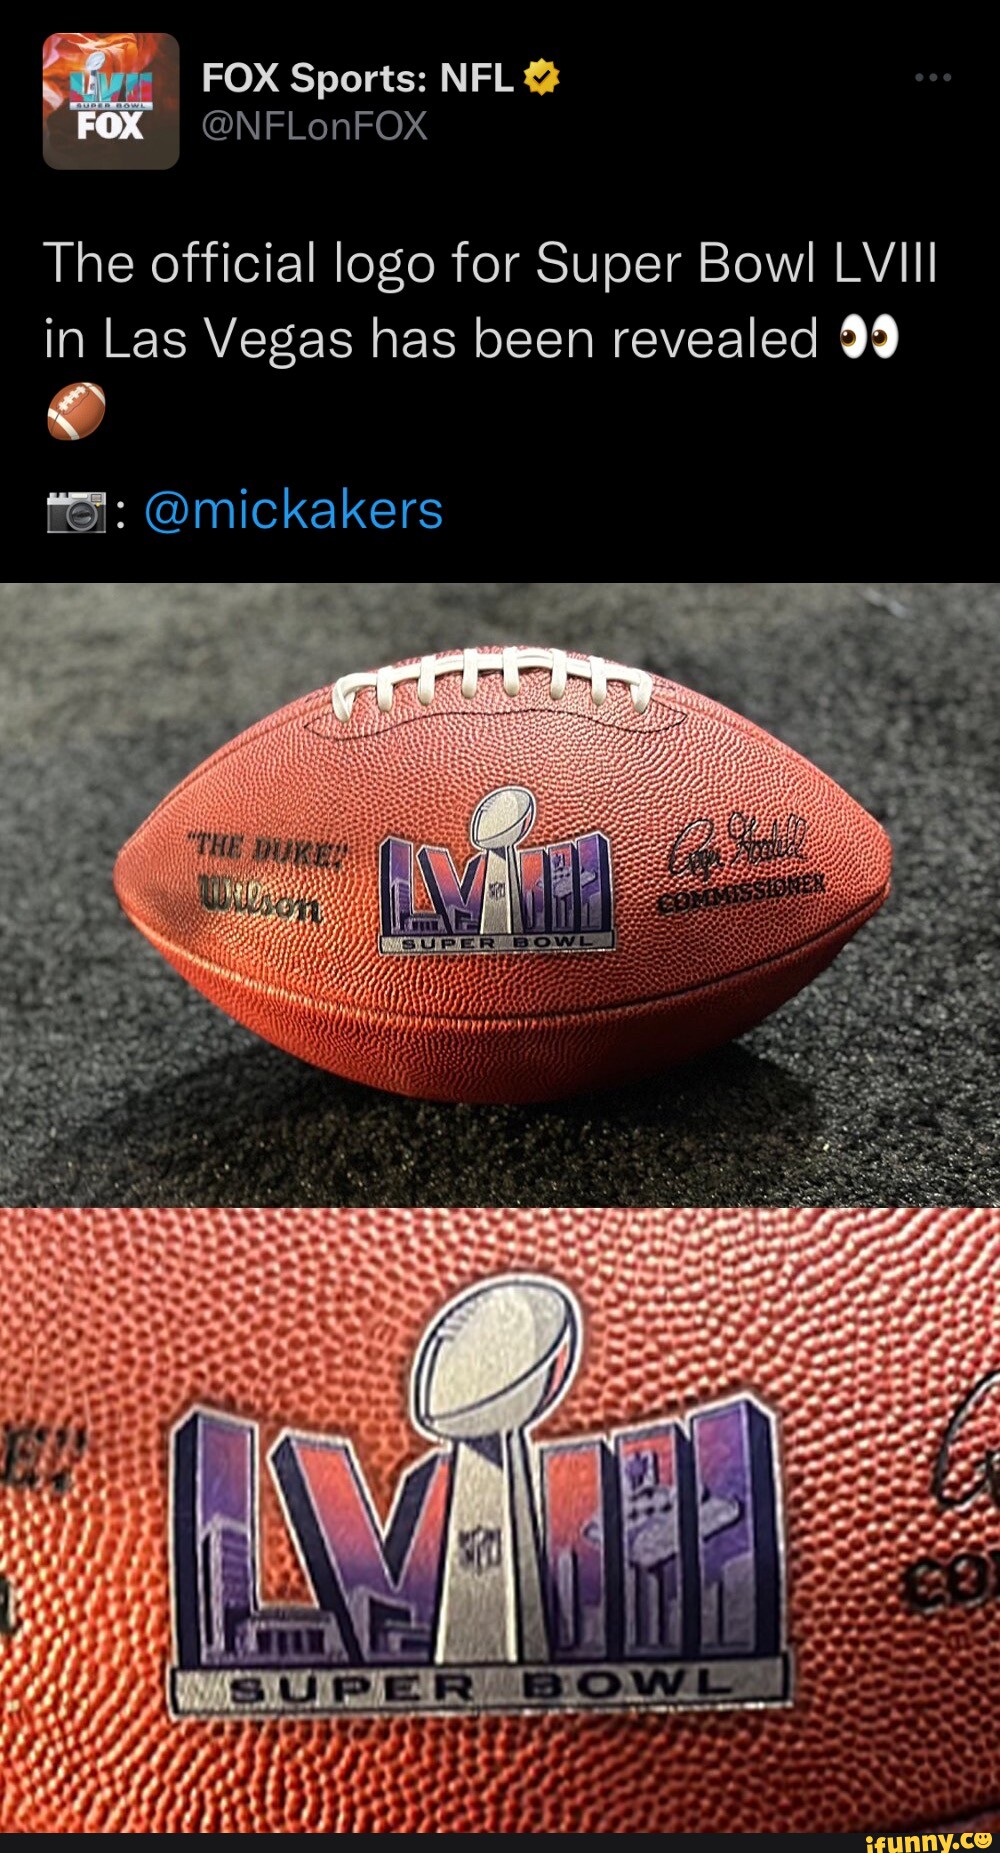 FOX Sports: NFL @NFLonFOX @mickakers The official logo for Super Bowl LVIII  in Las Vegas has been revealed - iFunny Brazil